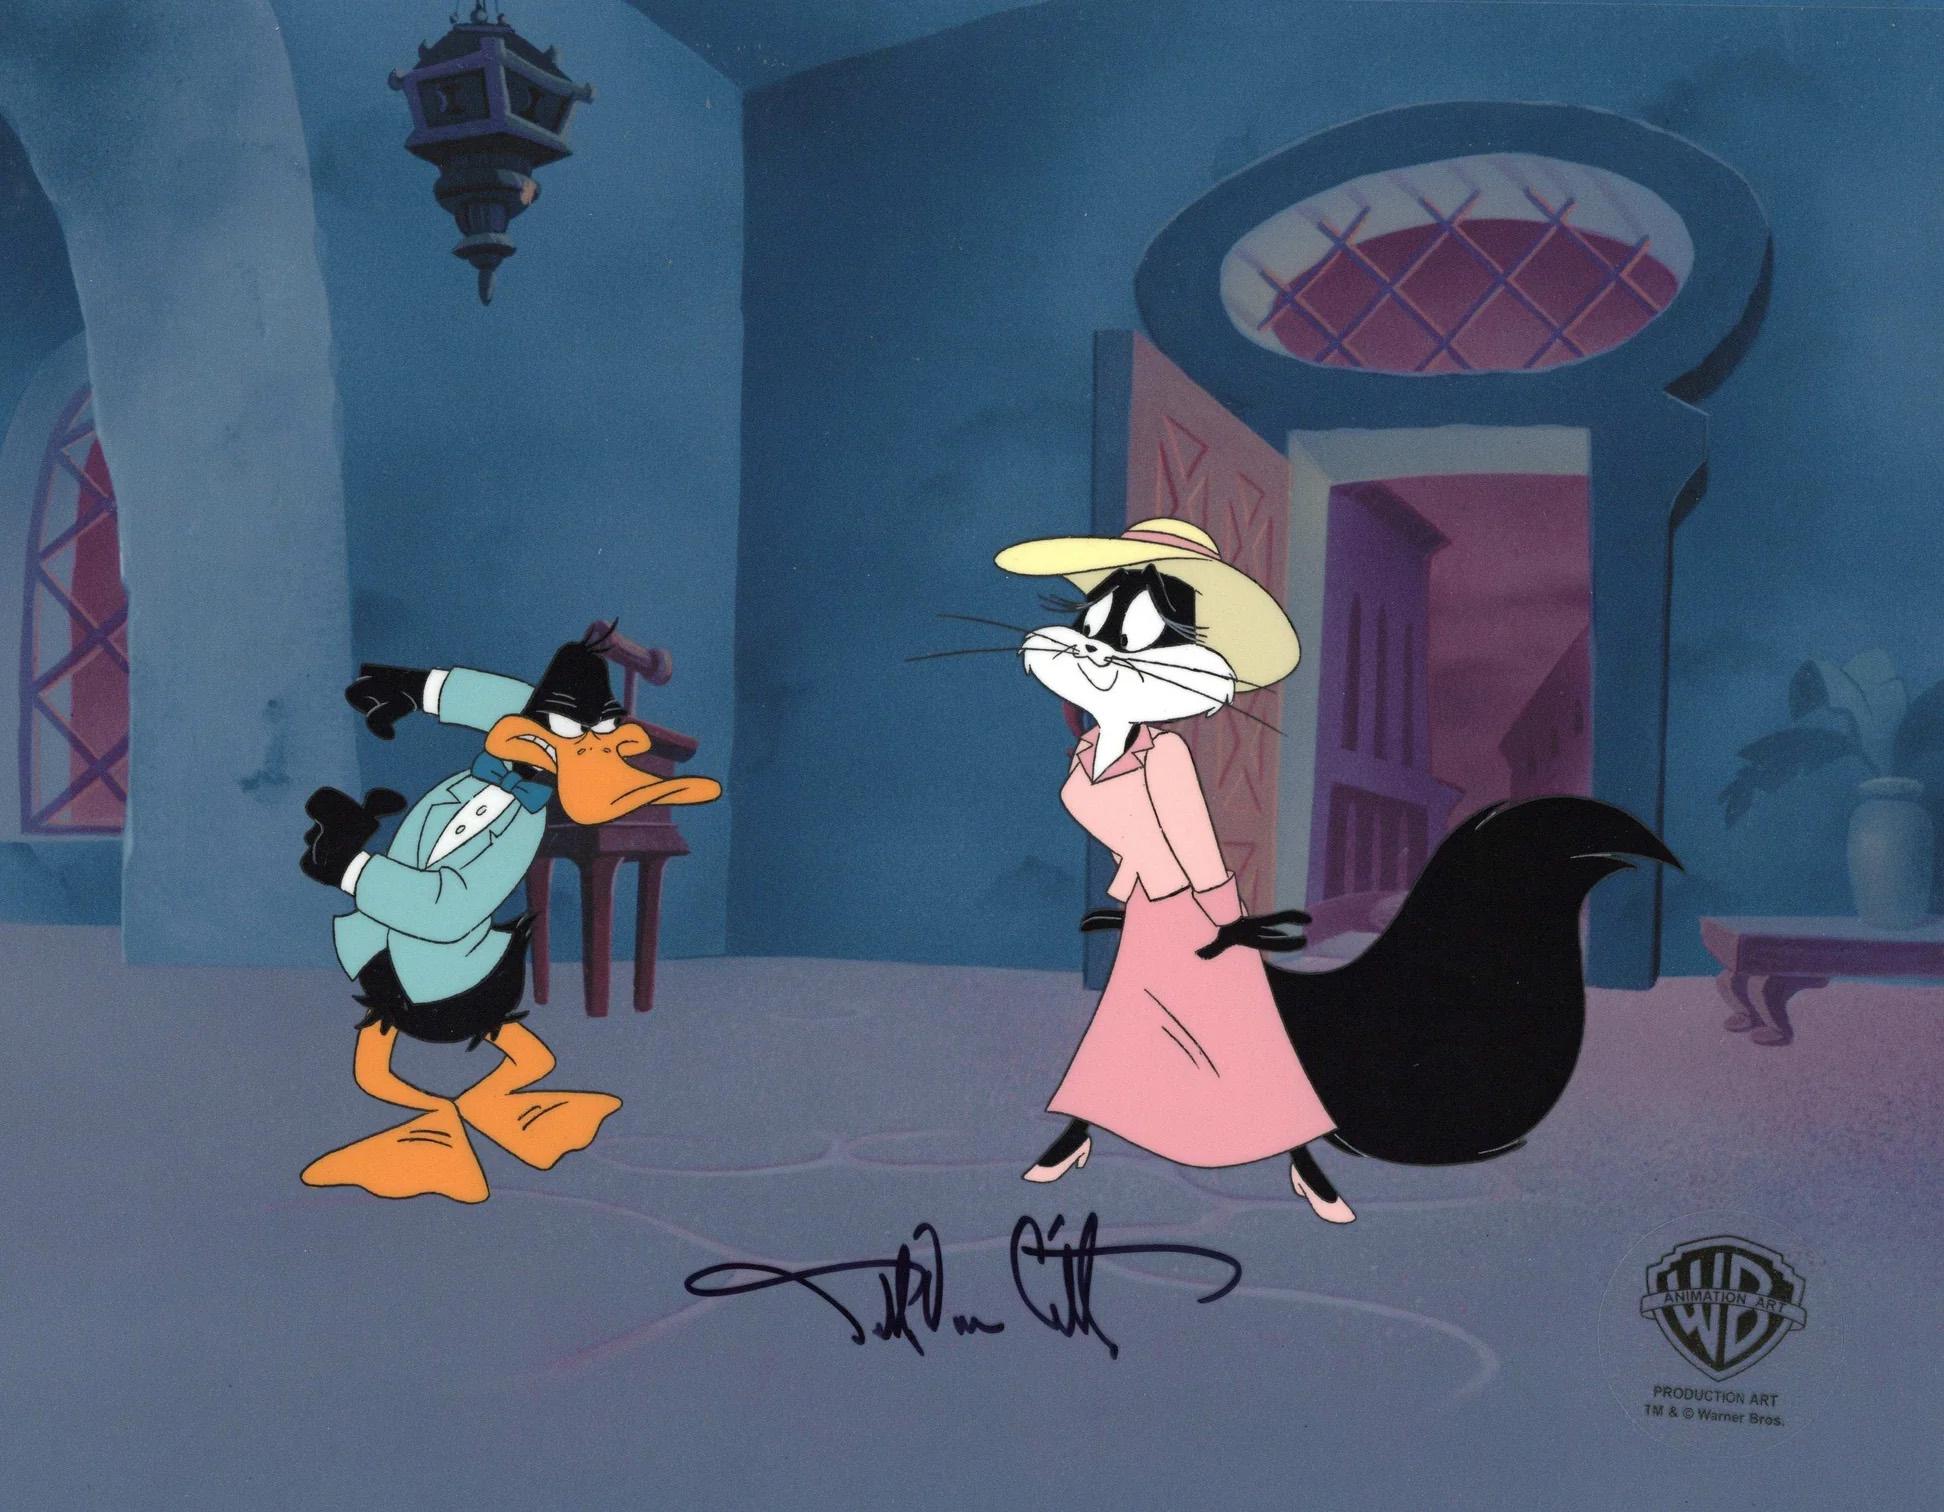 Looney Tunes Original Production Cel Signed By Darrell Citters: Daffy, Penelope - Art by Warner Bros. Studio Artists